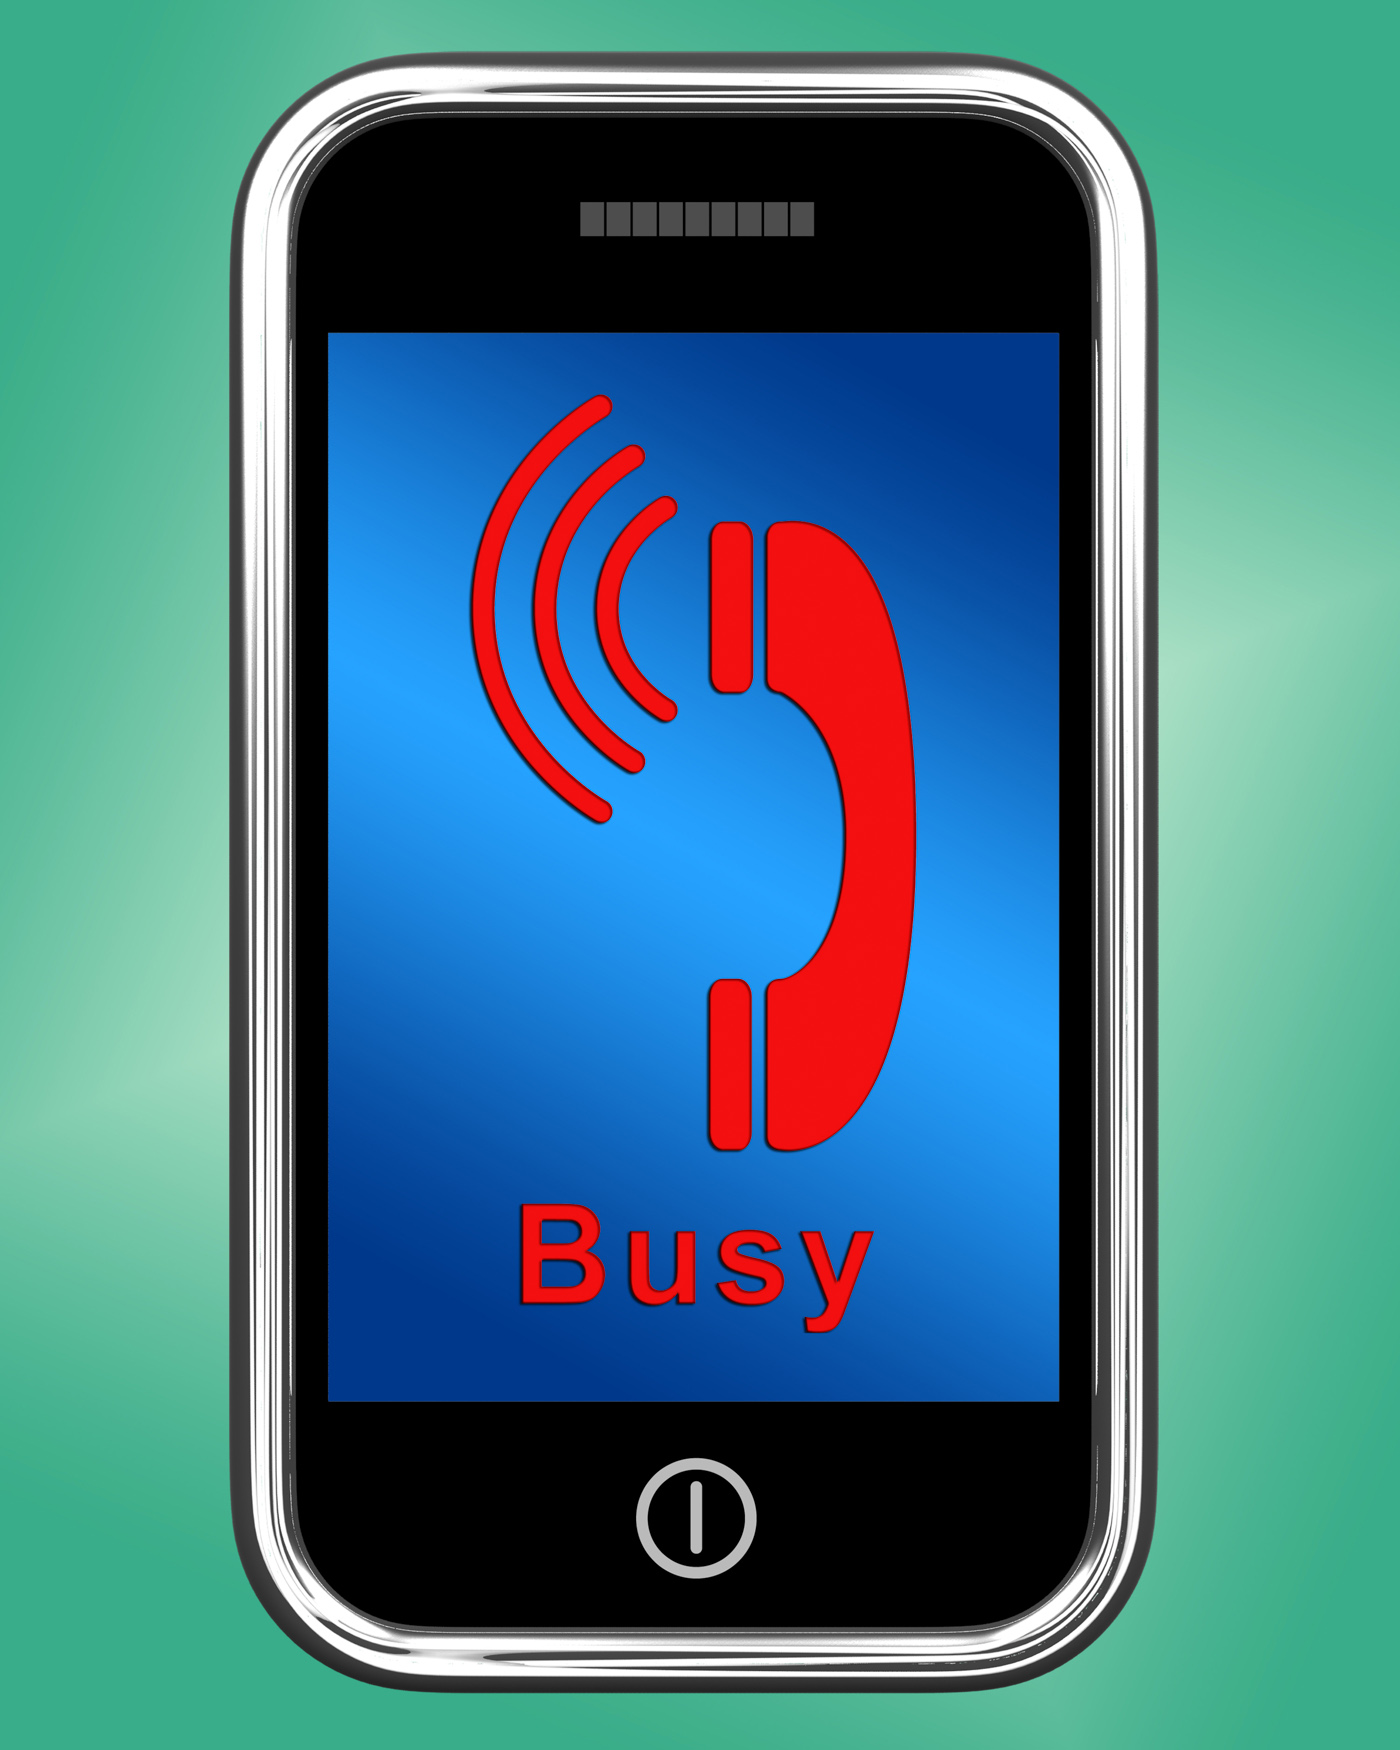 Busy Icon On Mobile Phone Shows Engaged Connection, Busy, Call, Cell, Cellphone, HQ Photo